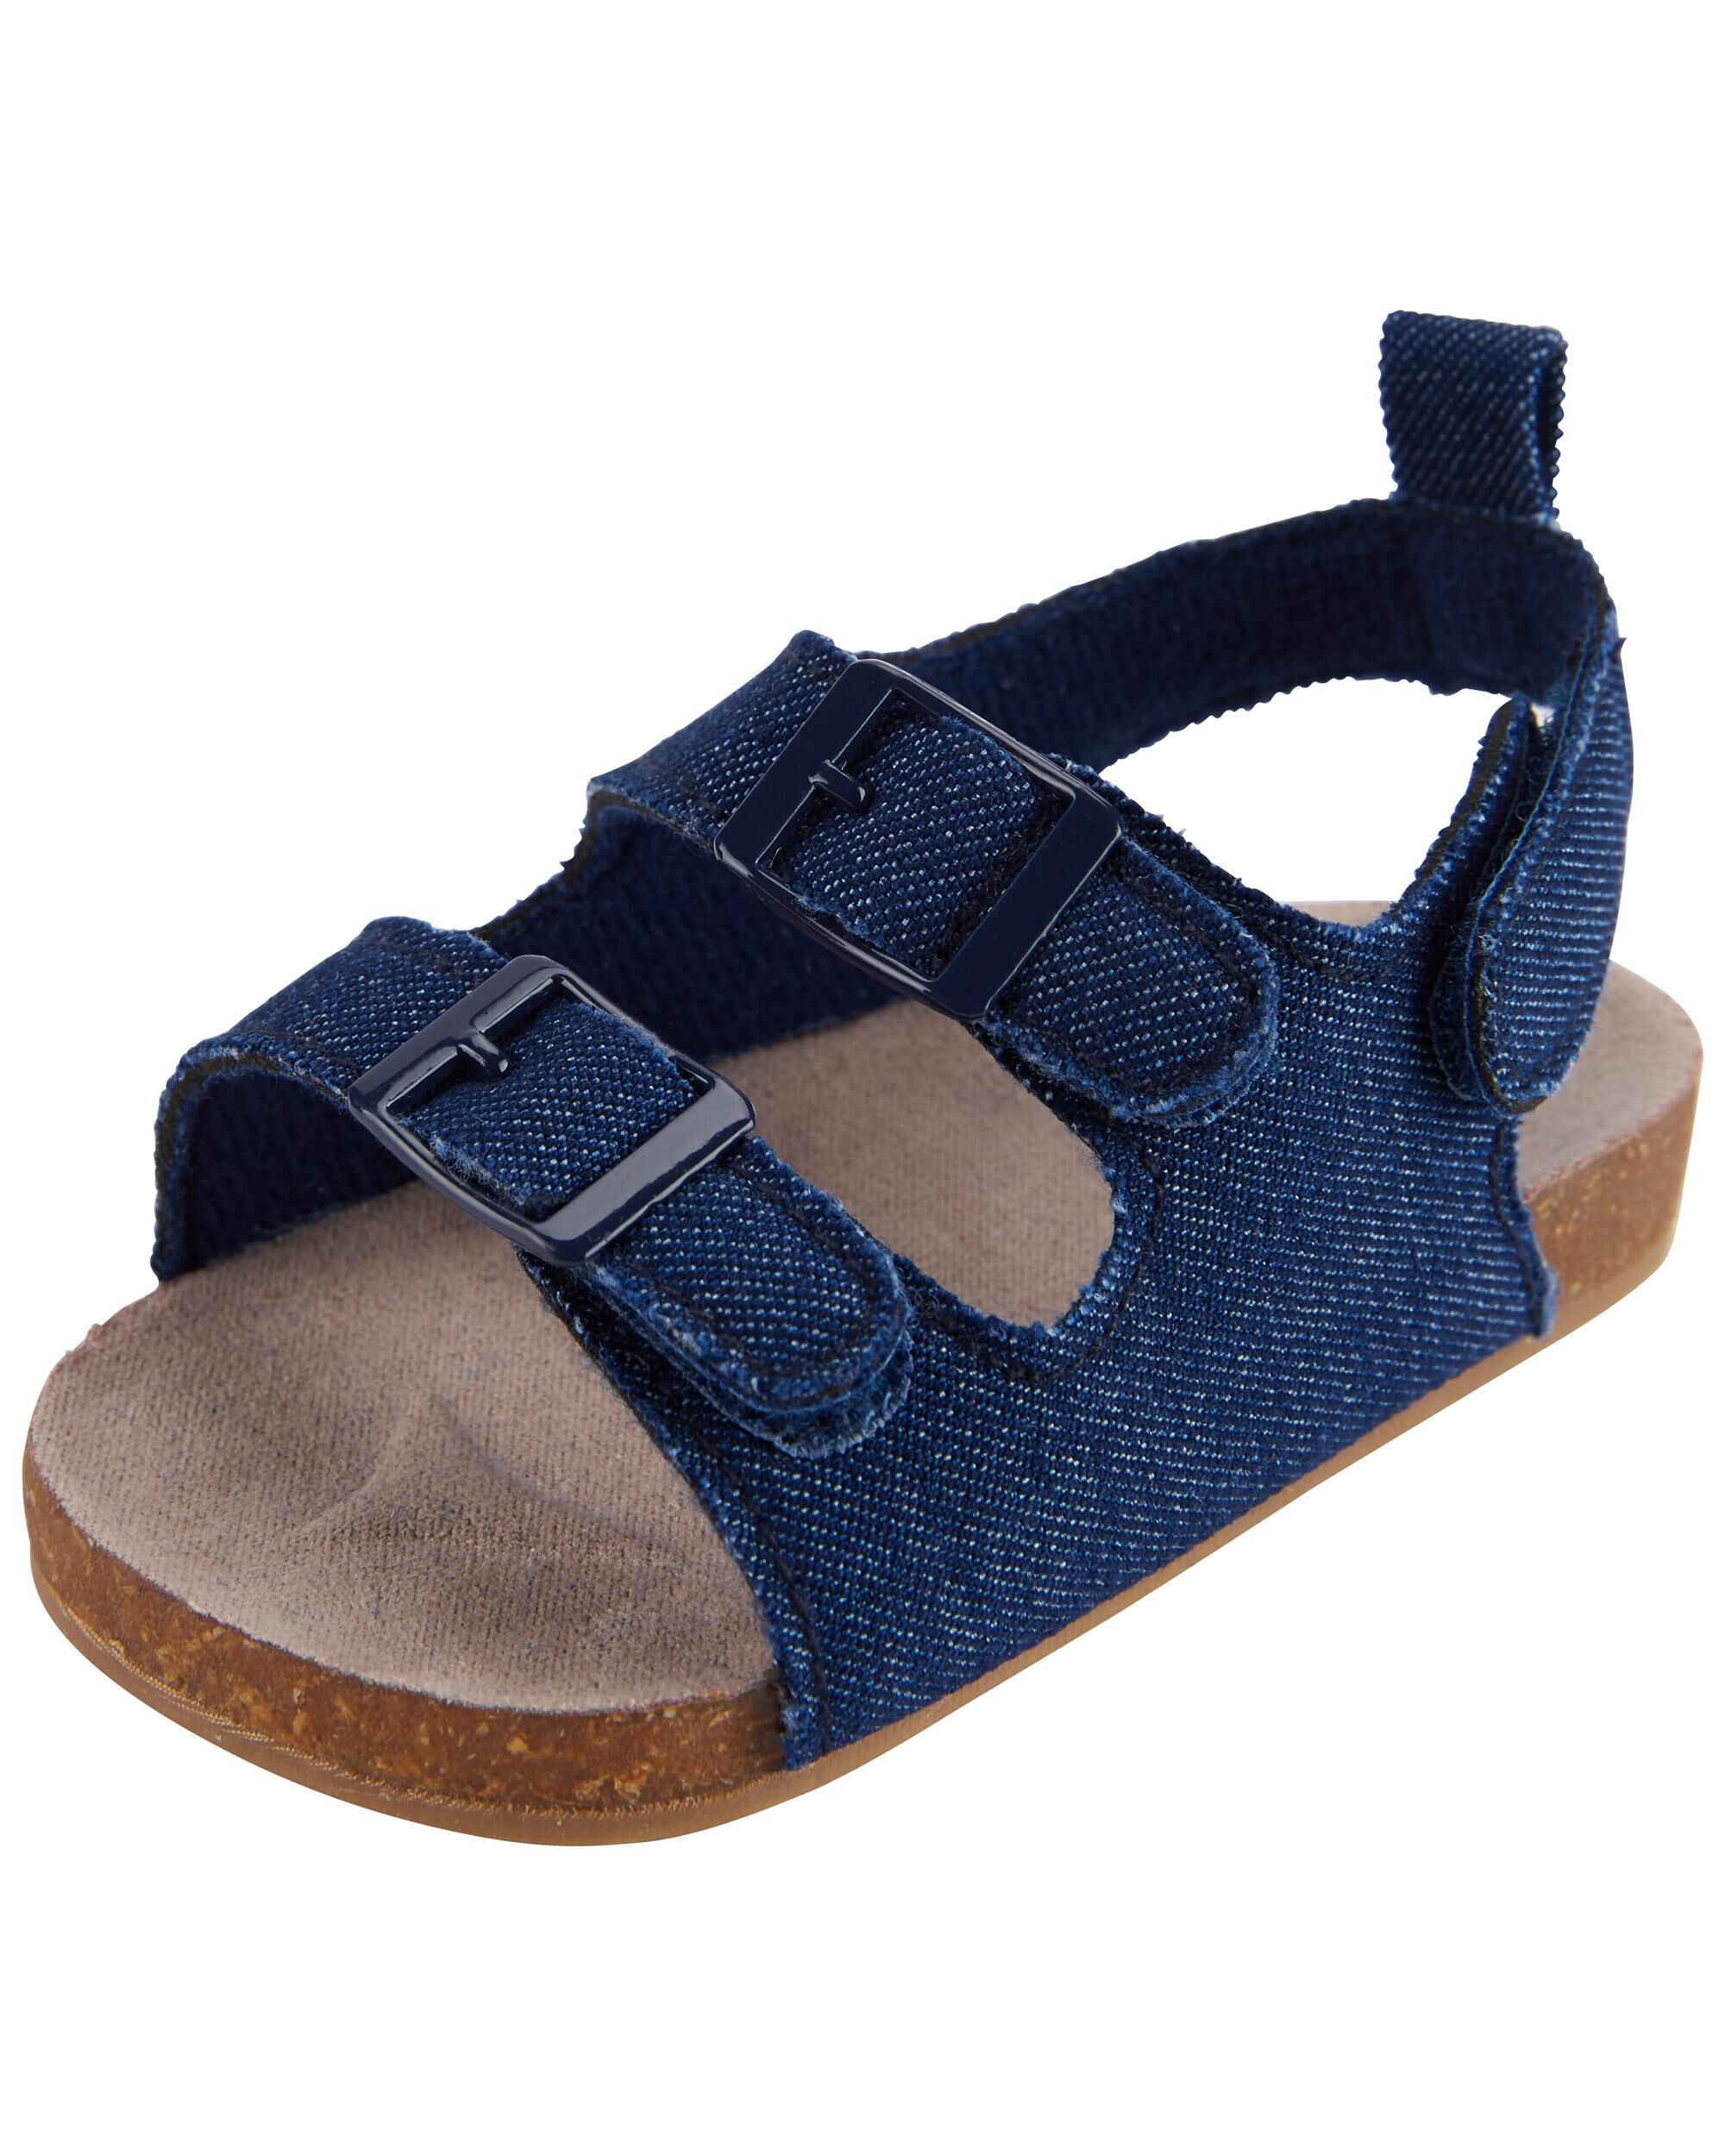 Baby Boy Shoes (Sizes 0-6) | Carter's | Free Shipping